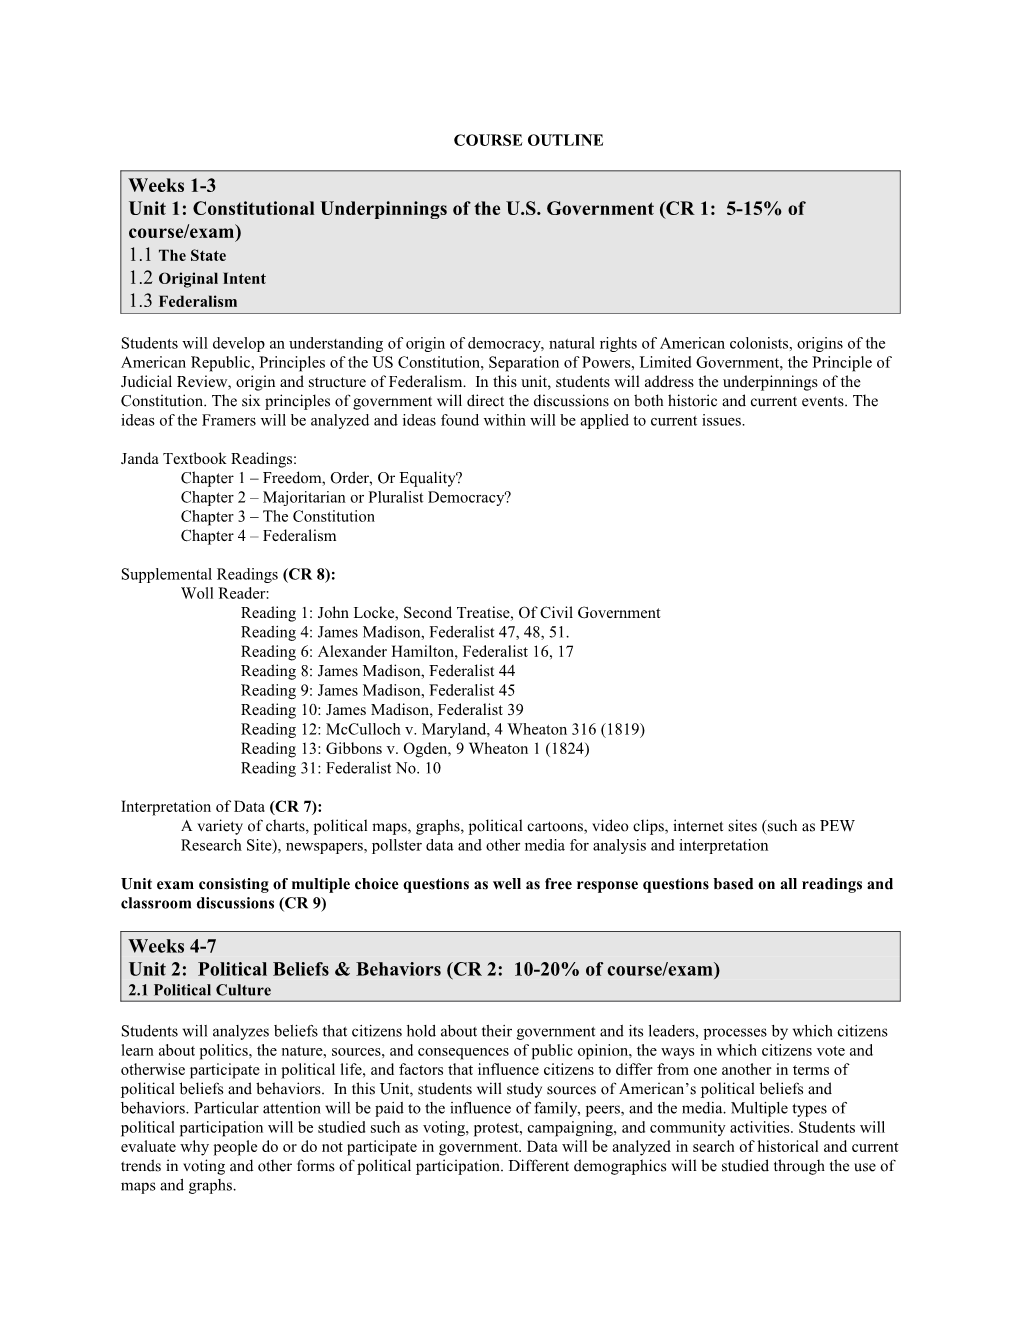 Unit 1: Constitutional Underpinnings of the U.S. Government (CR 1: 5-15% of Course/Exam)